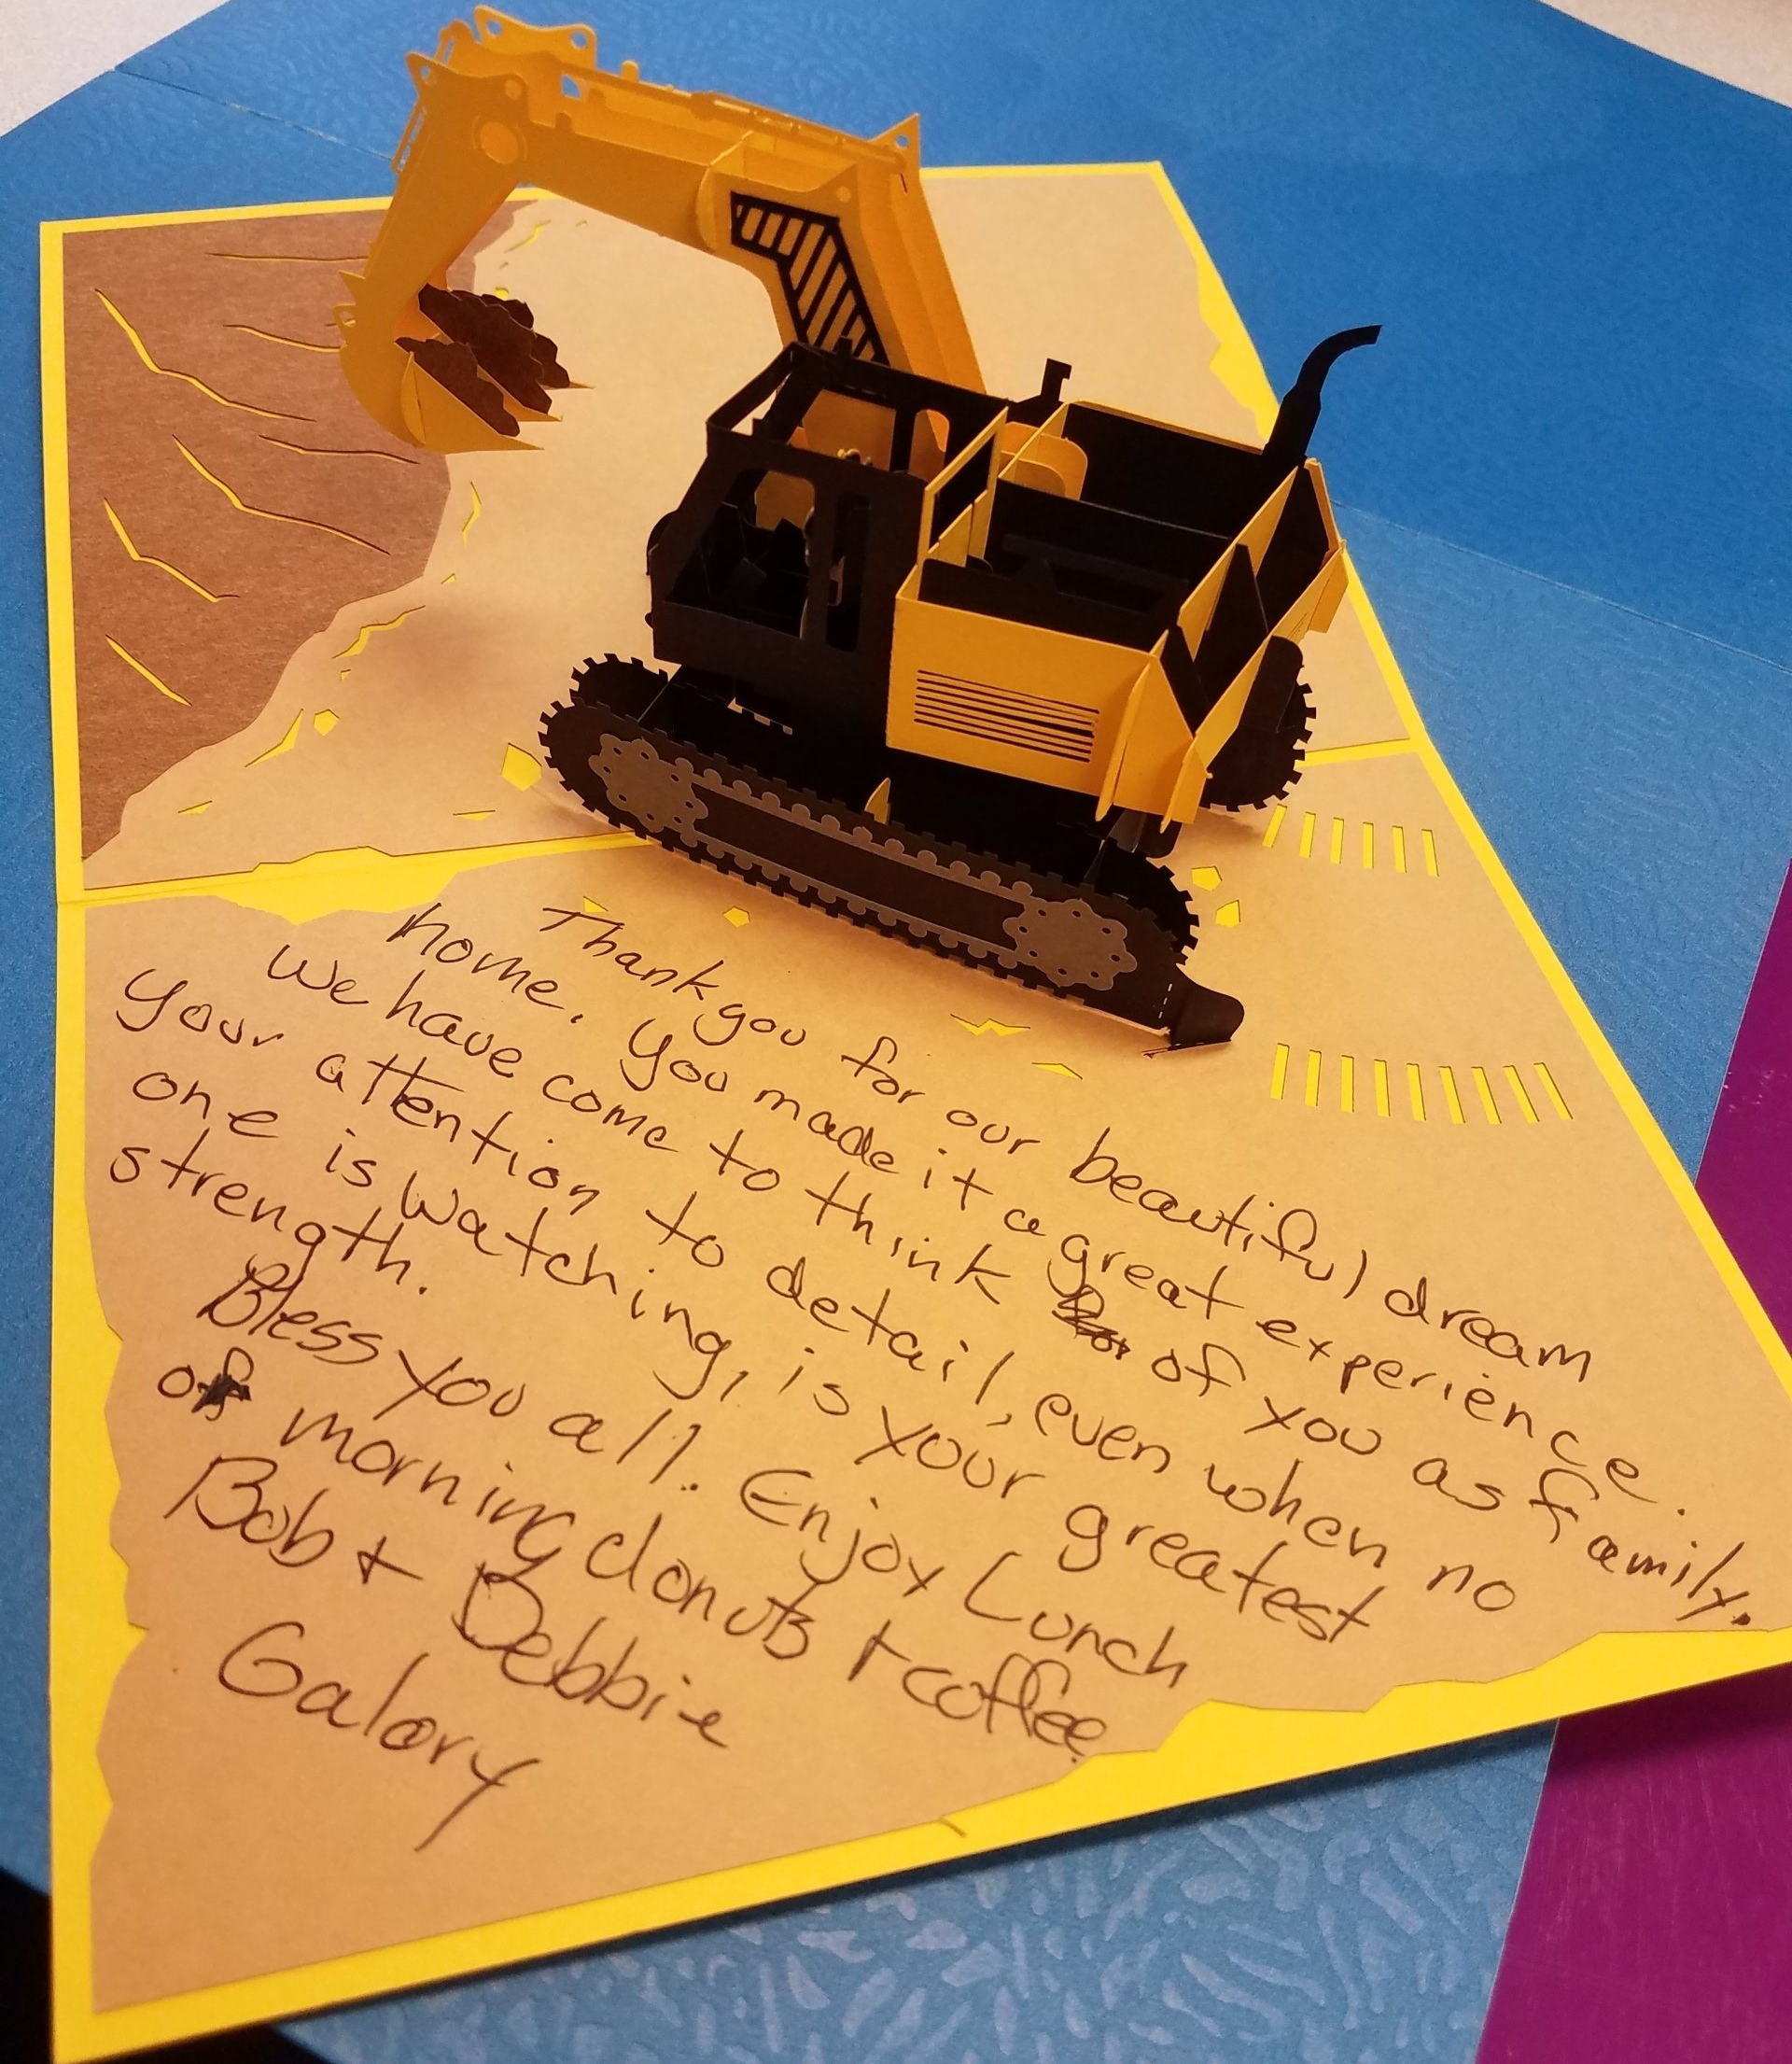 A close up of text on a card with a dump truck popout